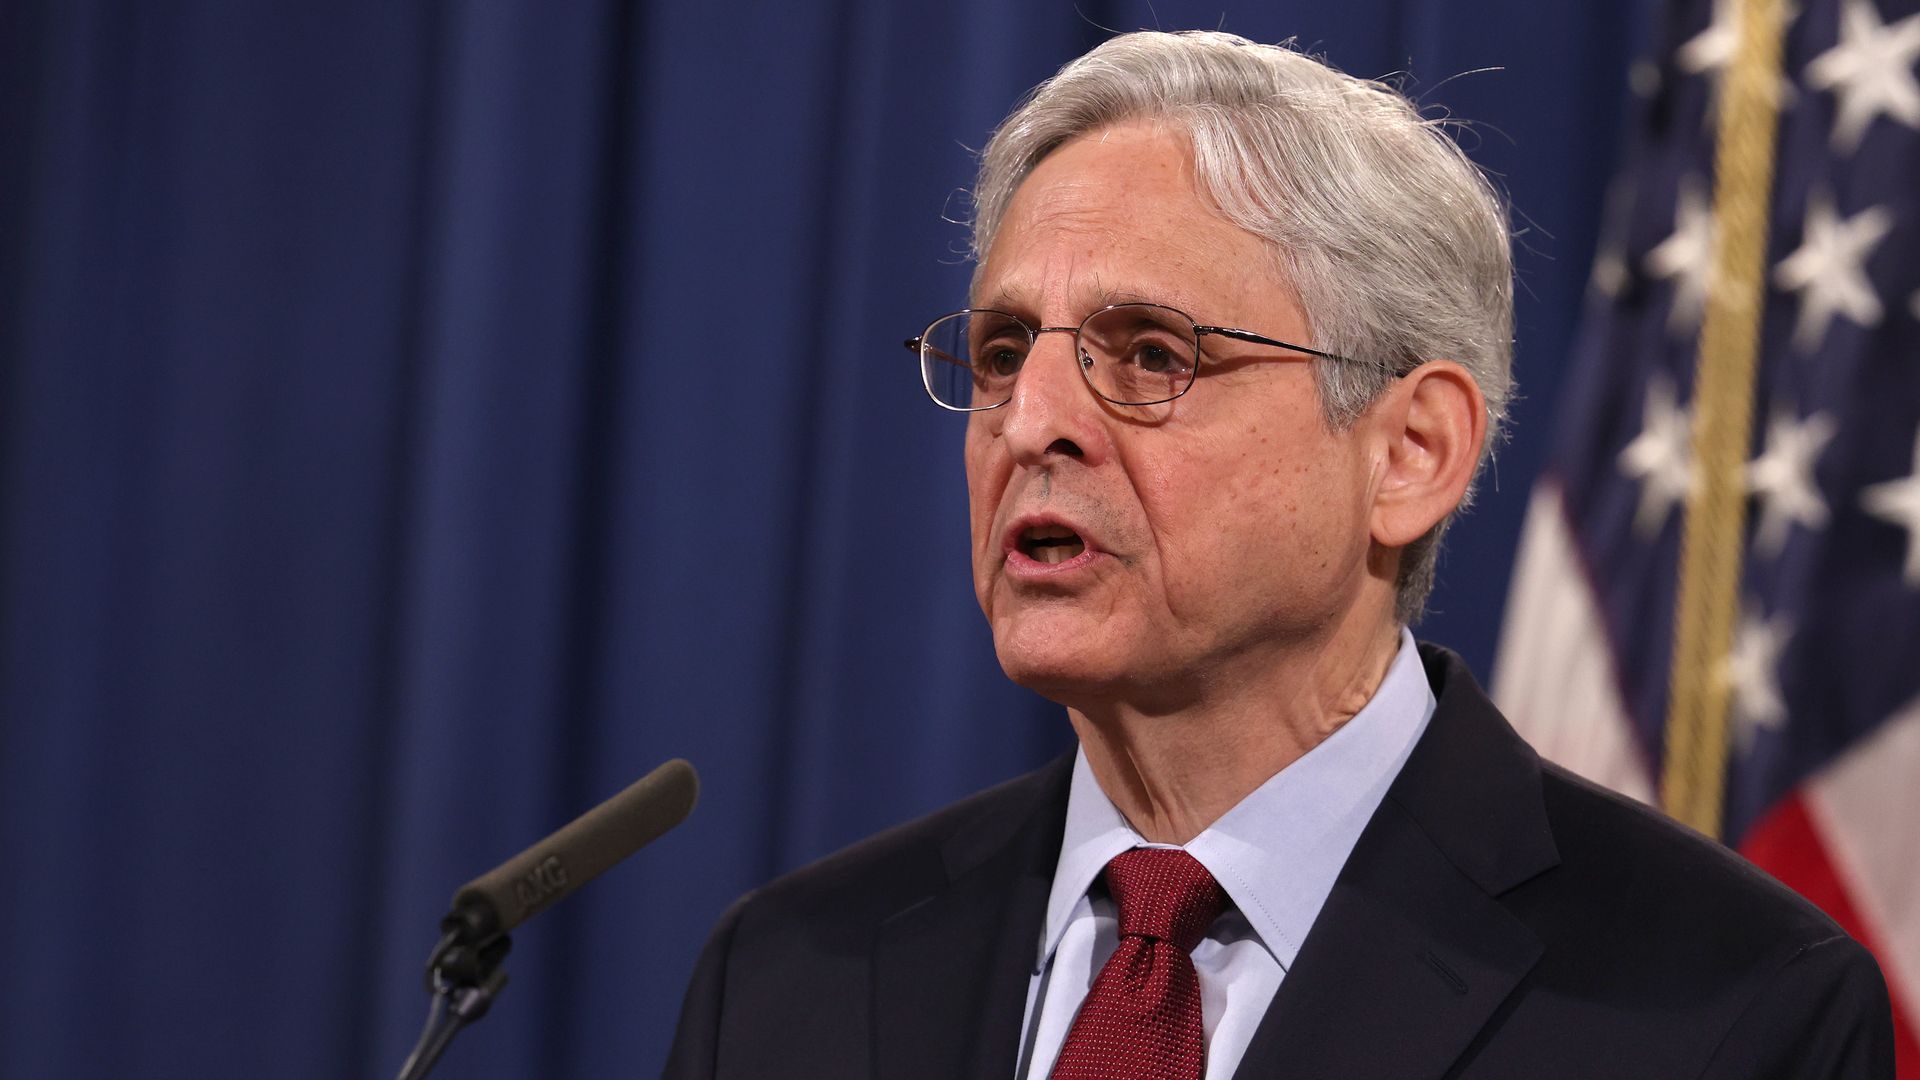 Attorney General Merrick Garland speaks at a news conference at the Department of Justice on June 25